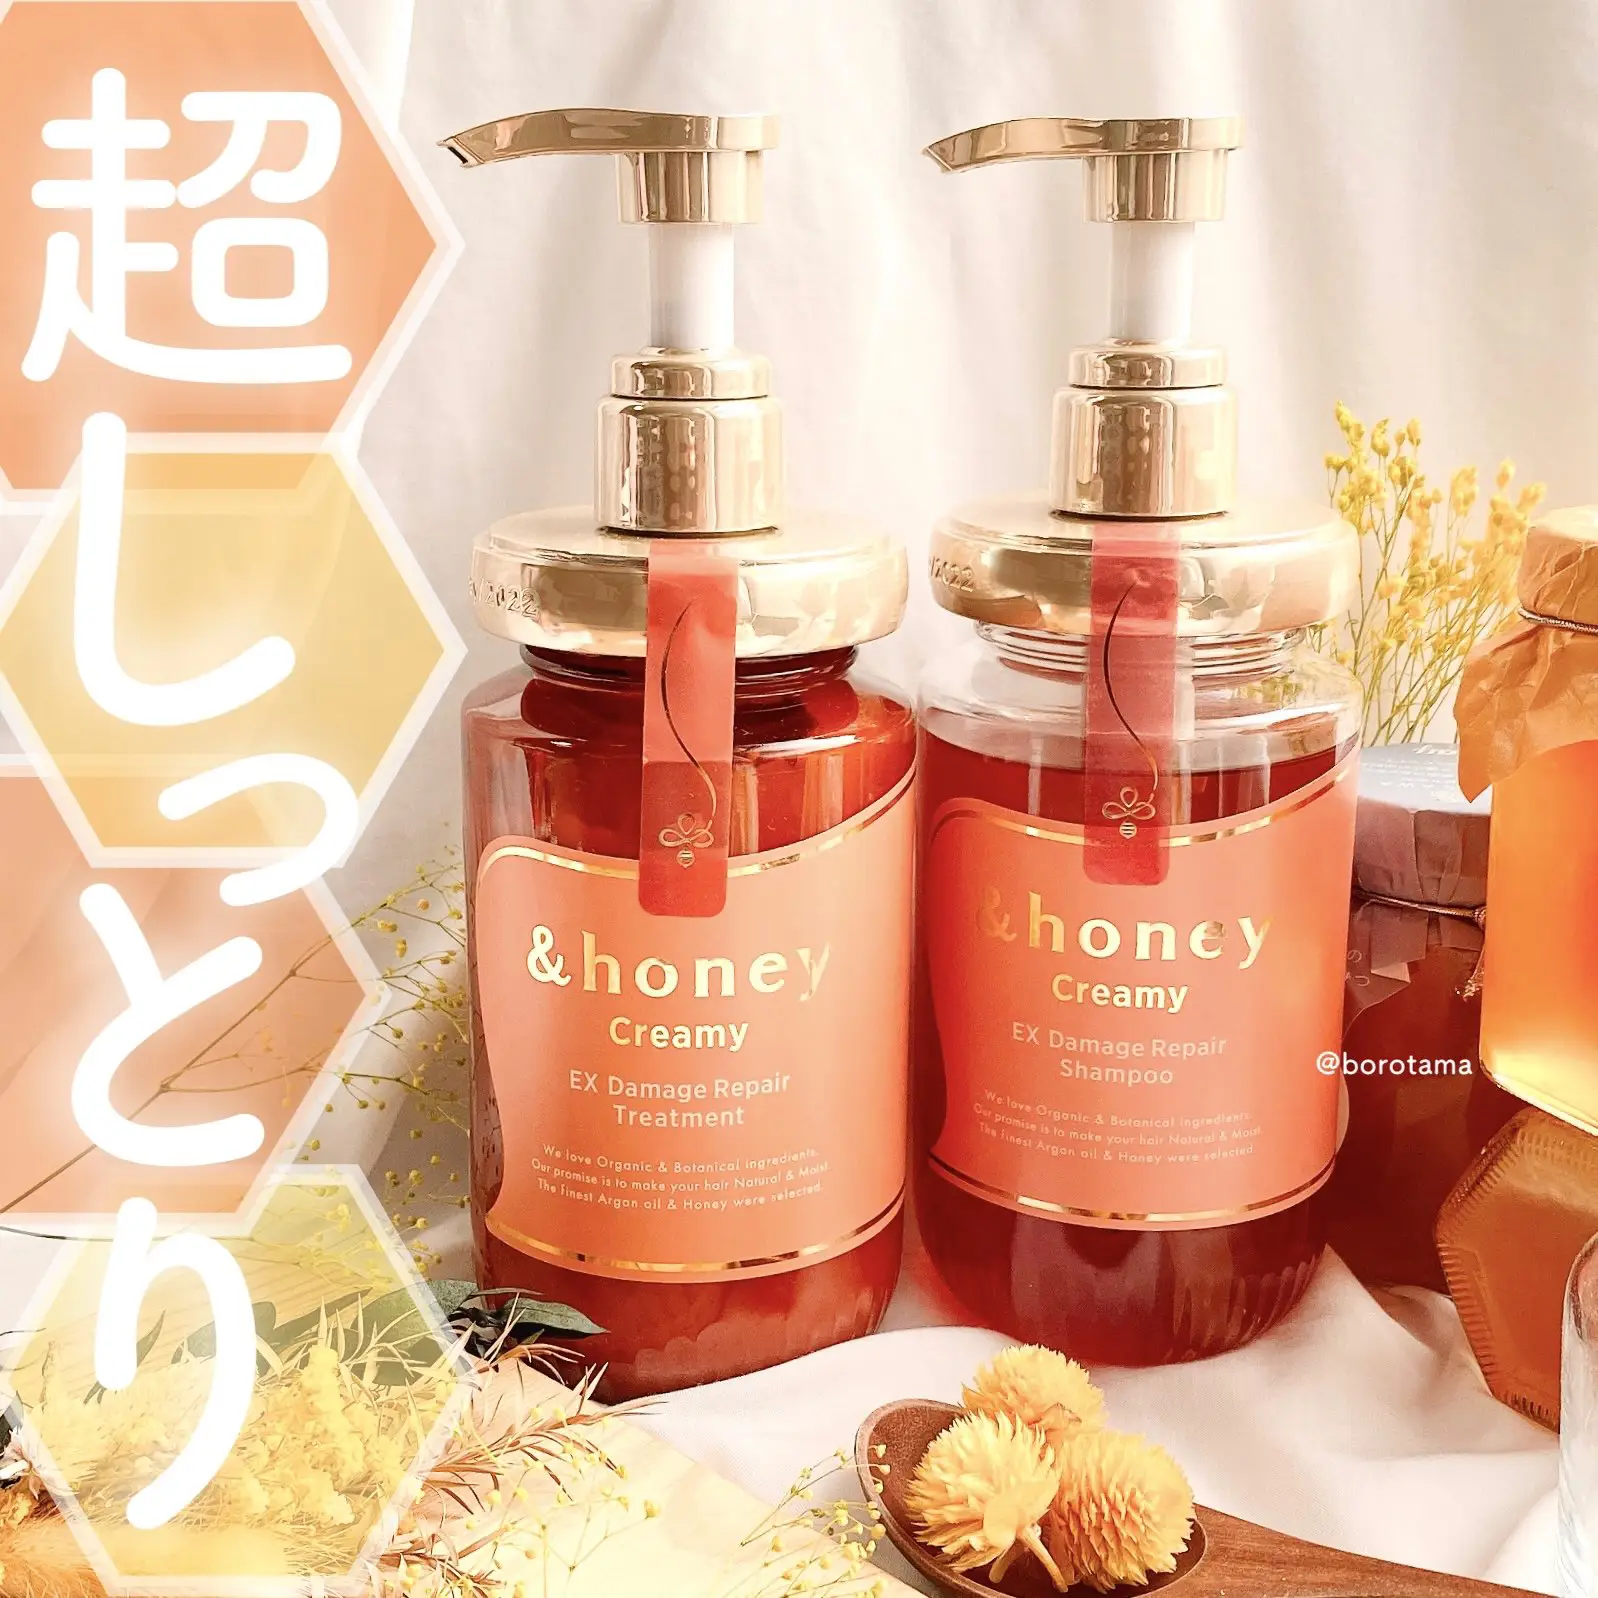 New series of &honey Creamy specializing in hair damage! Over 90%  moisturizing and repairing ingredients []